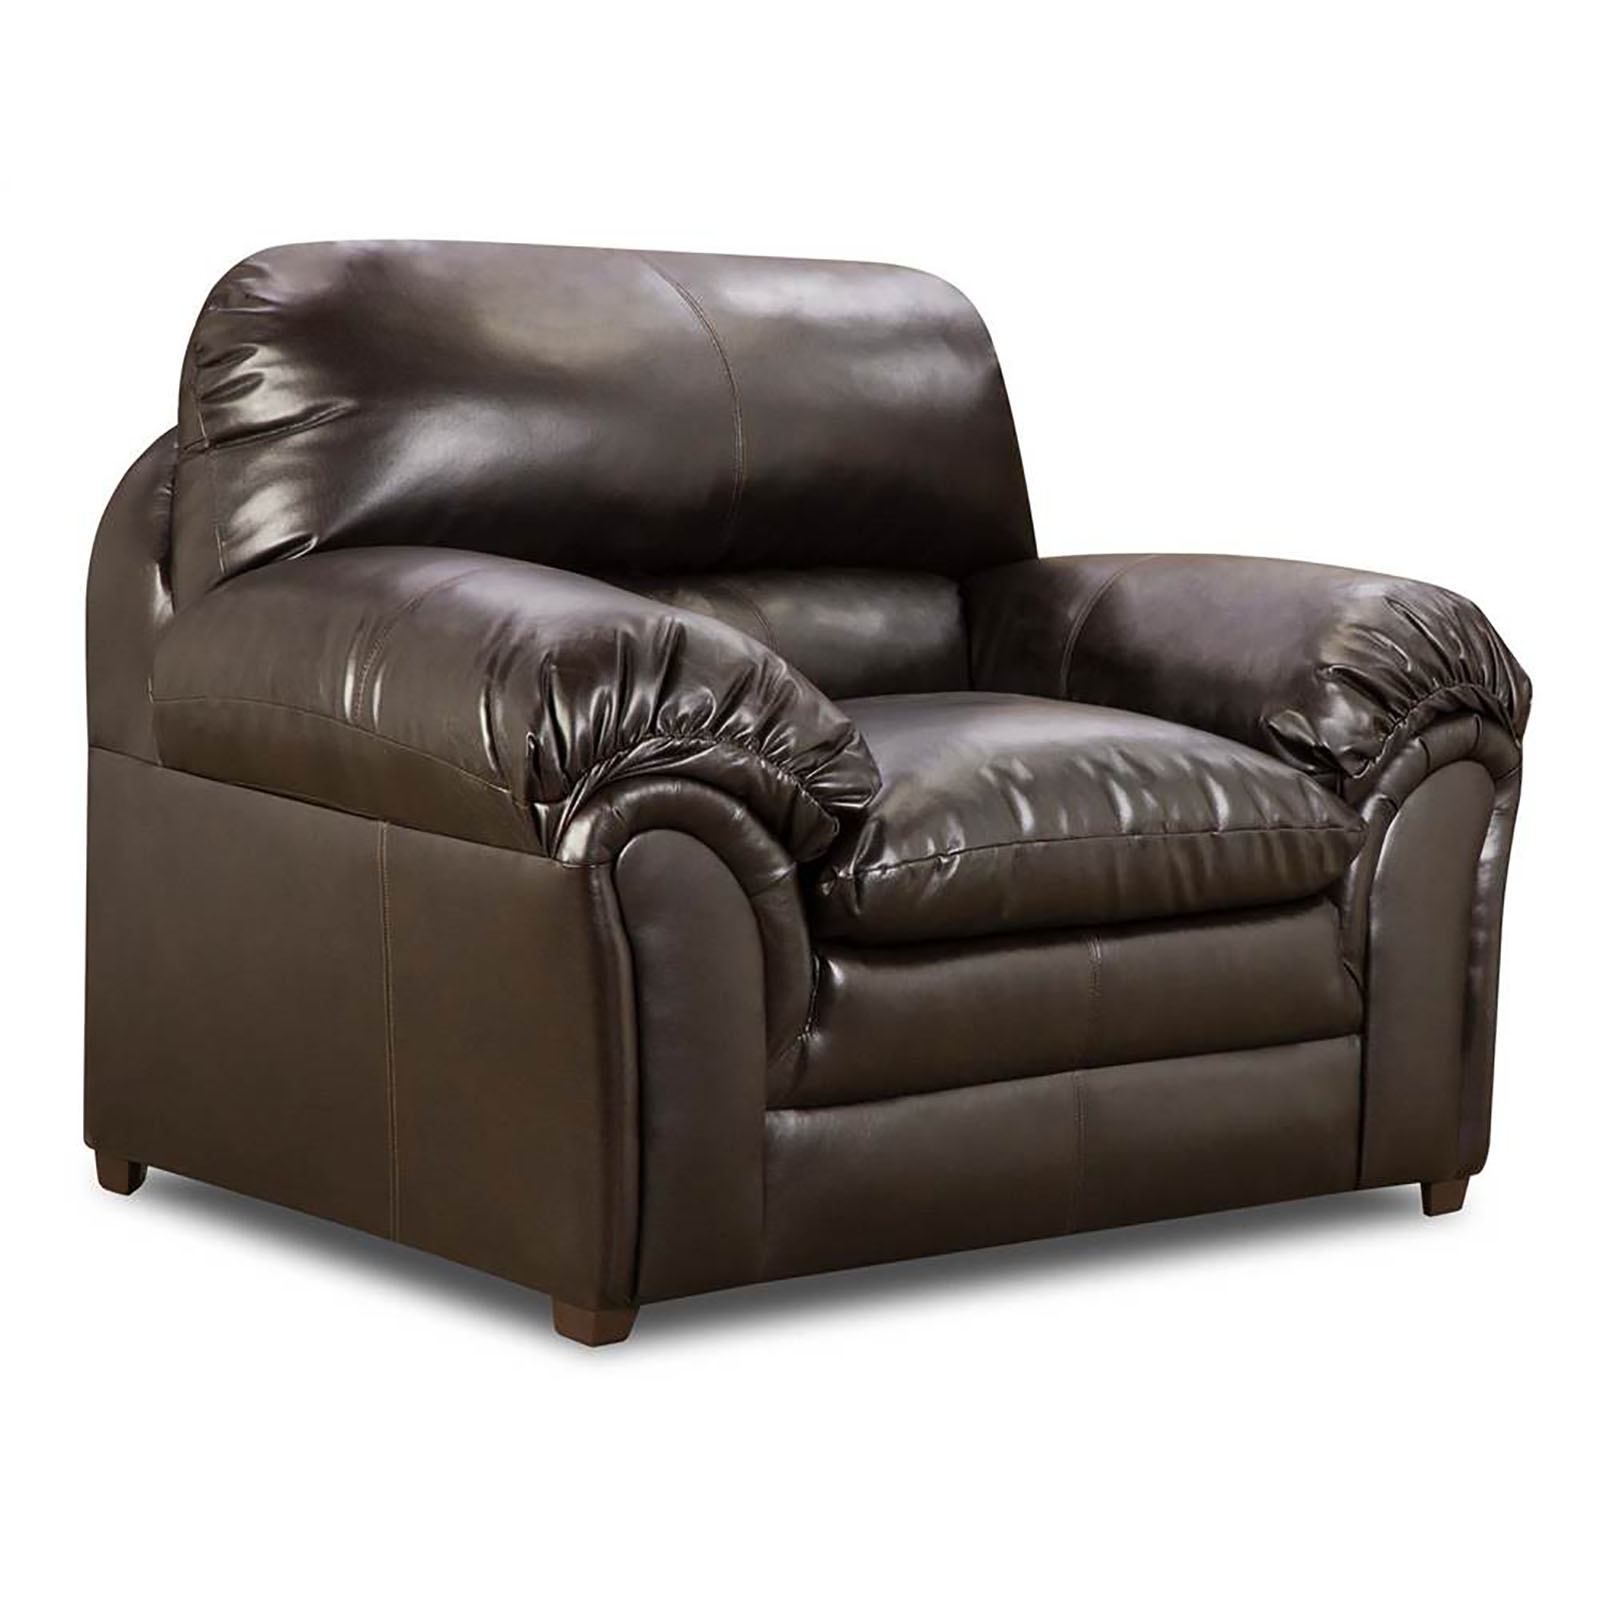 Simmons Upholstery Bonded Leather Chair - Brown